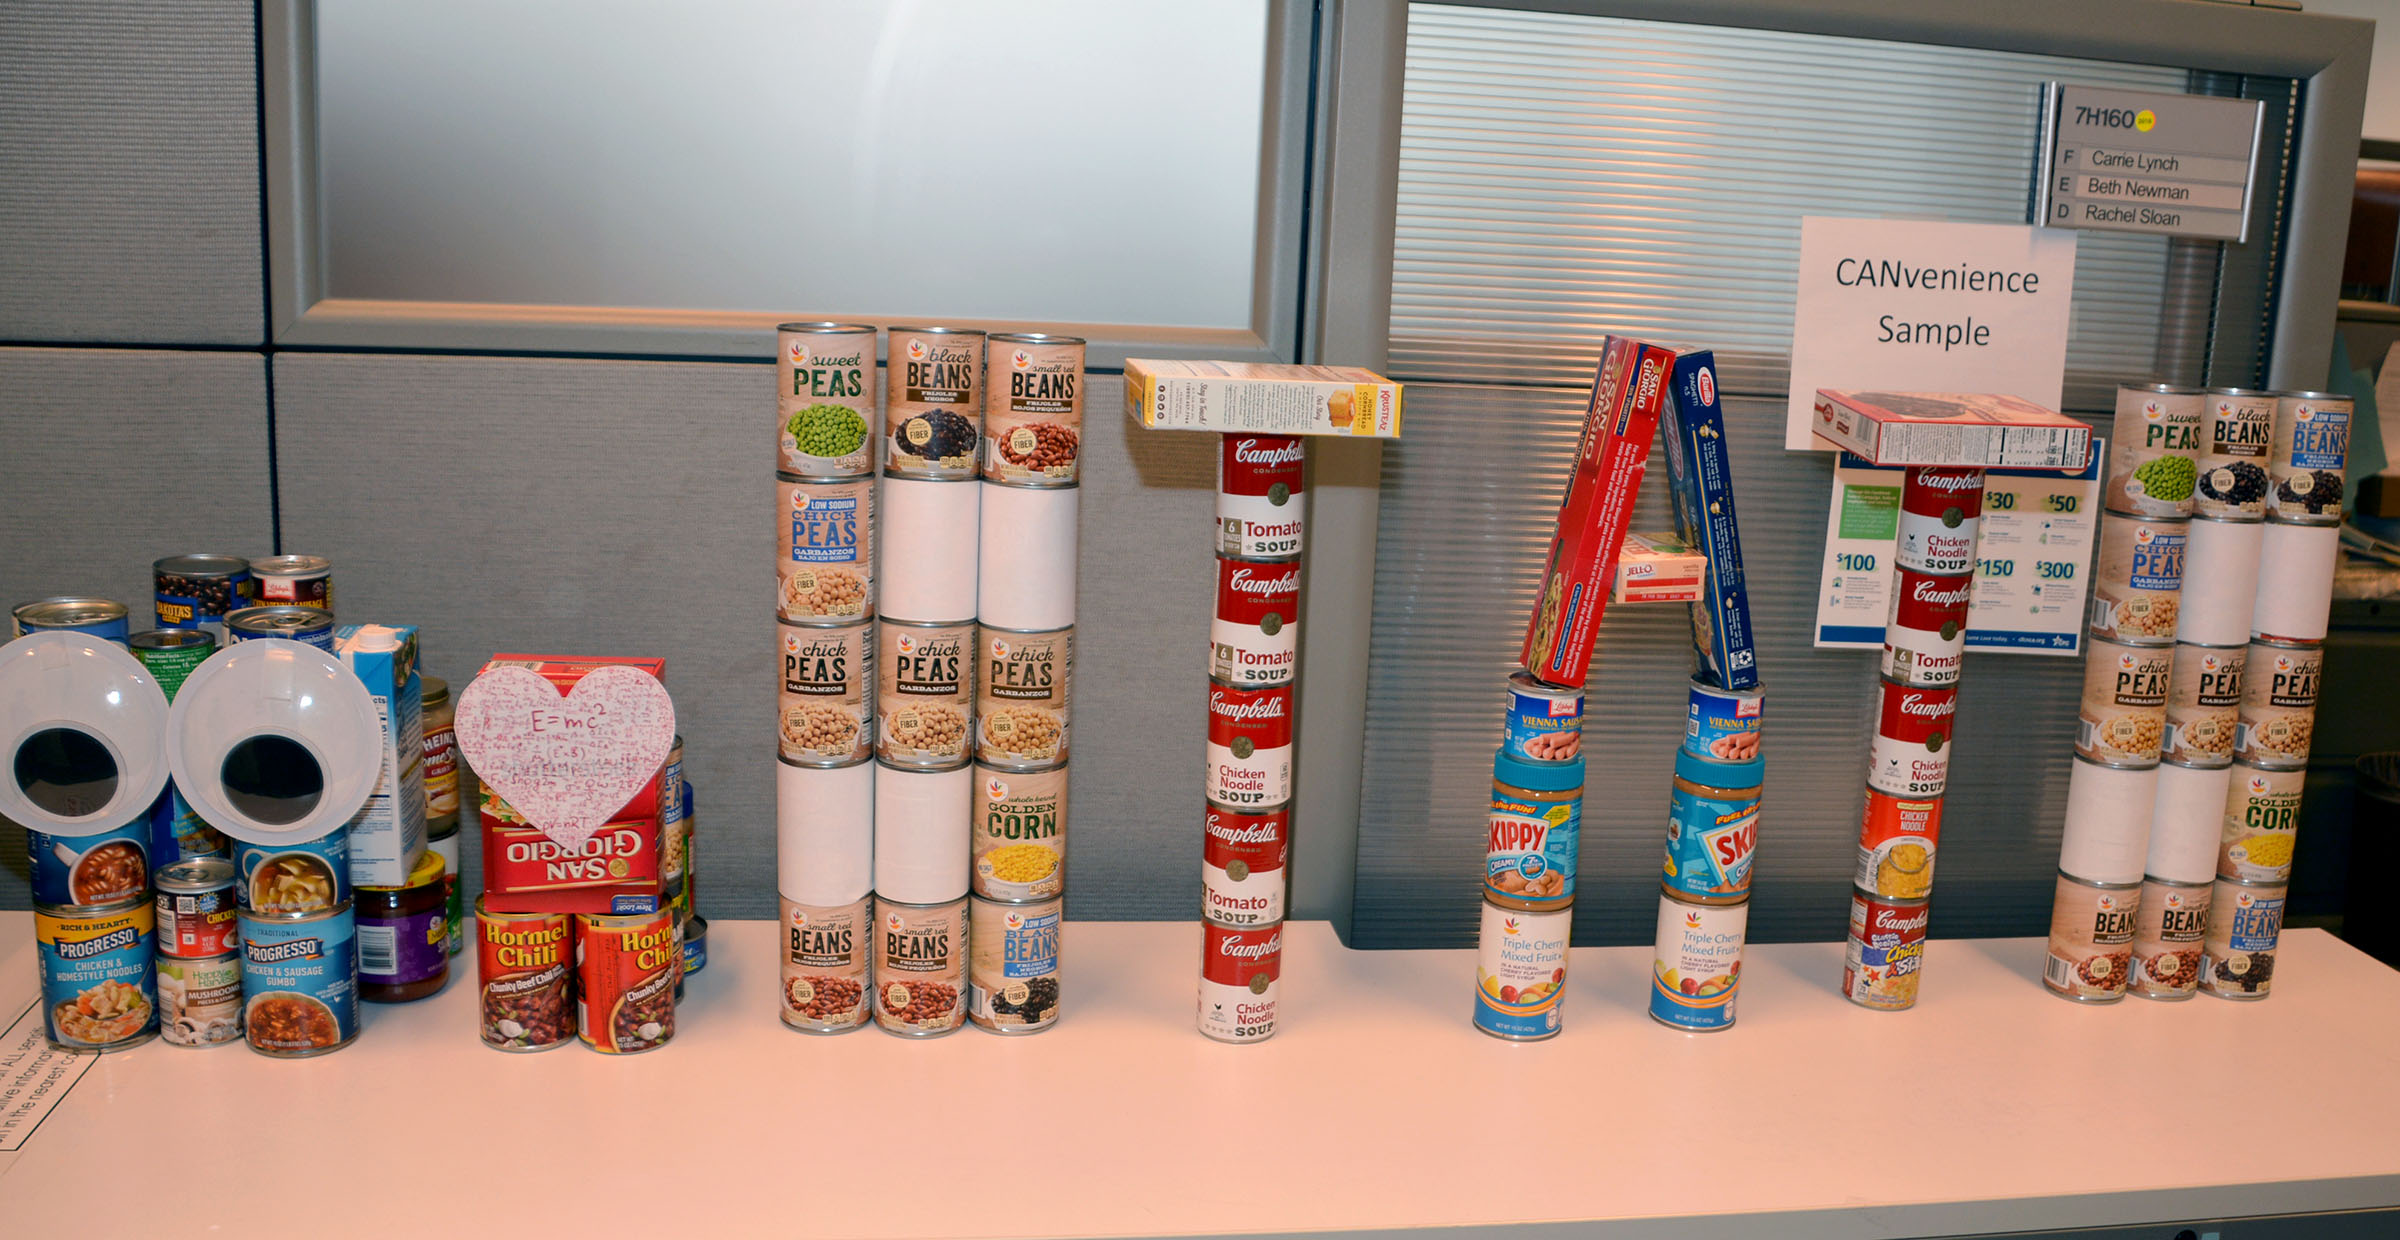  Towers of cans spelling out "STATS" for the 2019 CFC CANstruction Food Drive at the Census Bureau